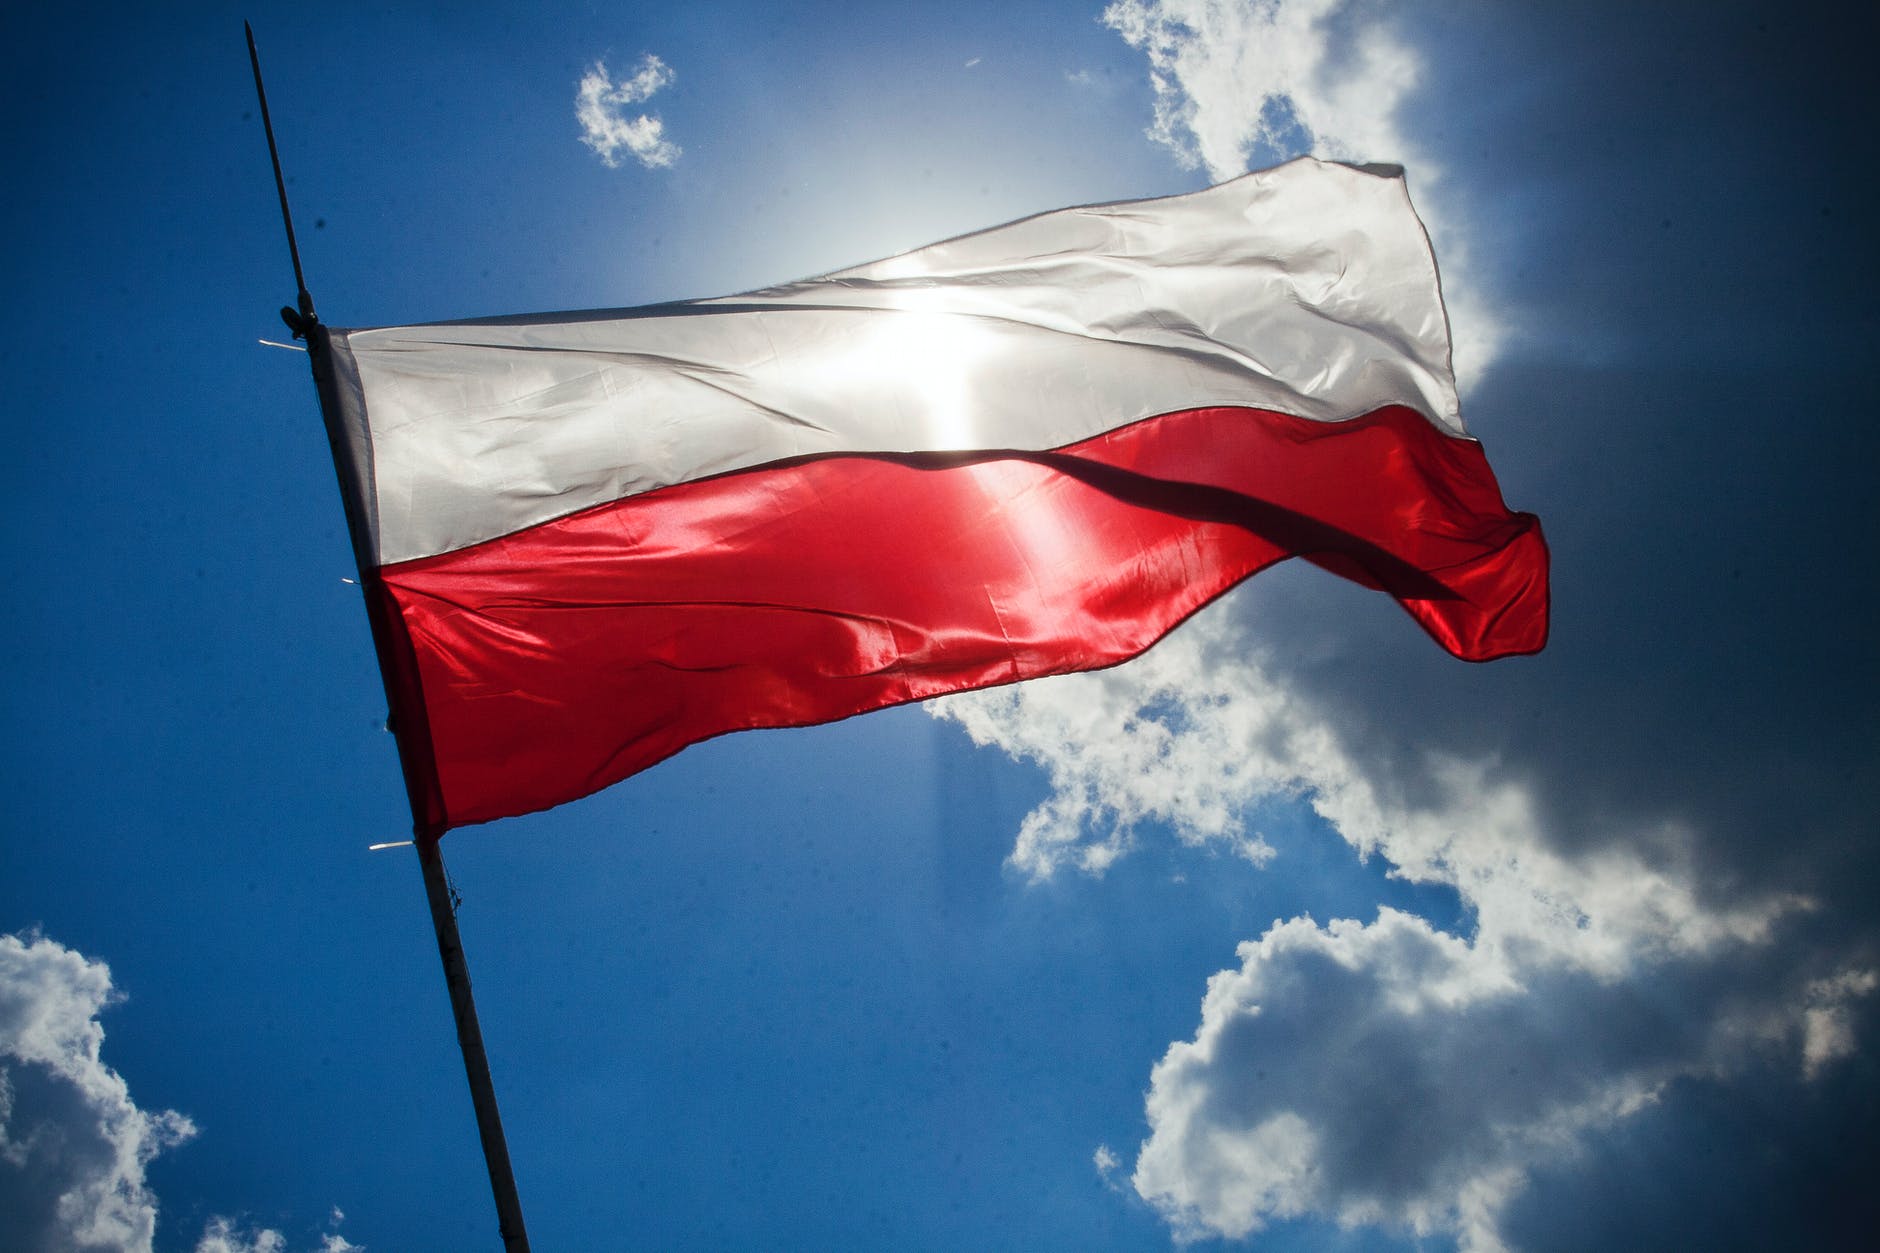 UNDER THREAT: Council Of Europe “concerned” For Safety And Rights Of LGBT+ People Of Poland